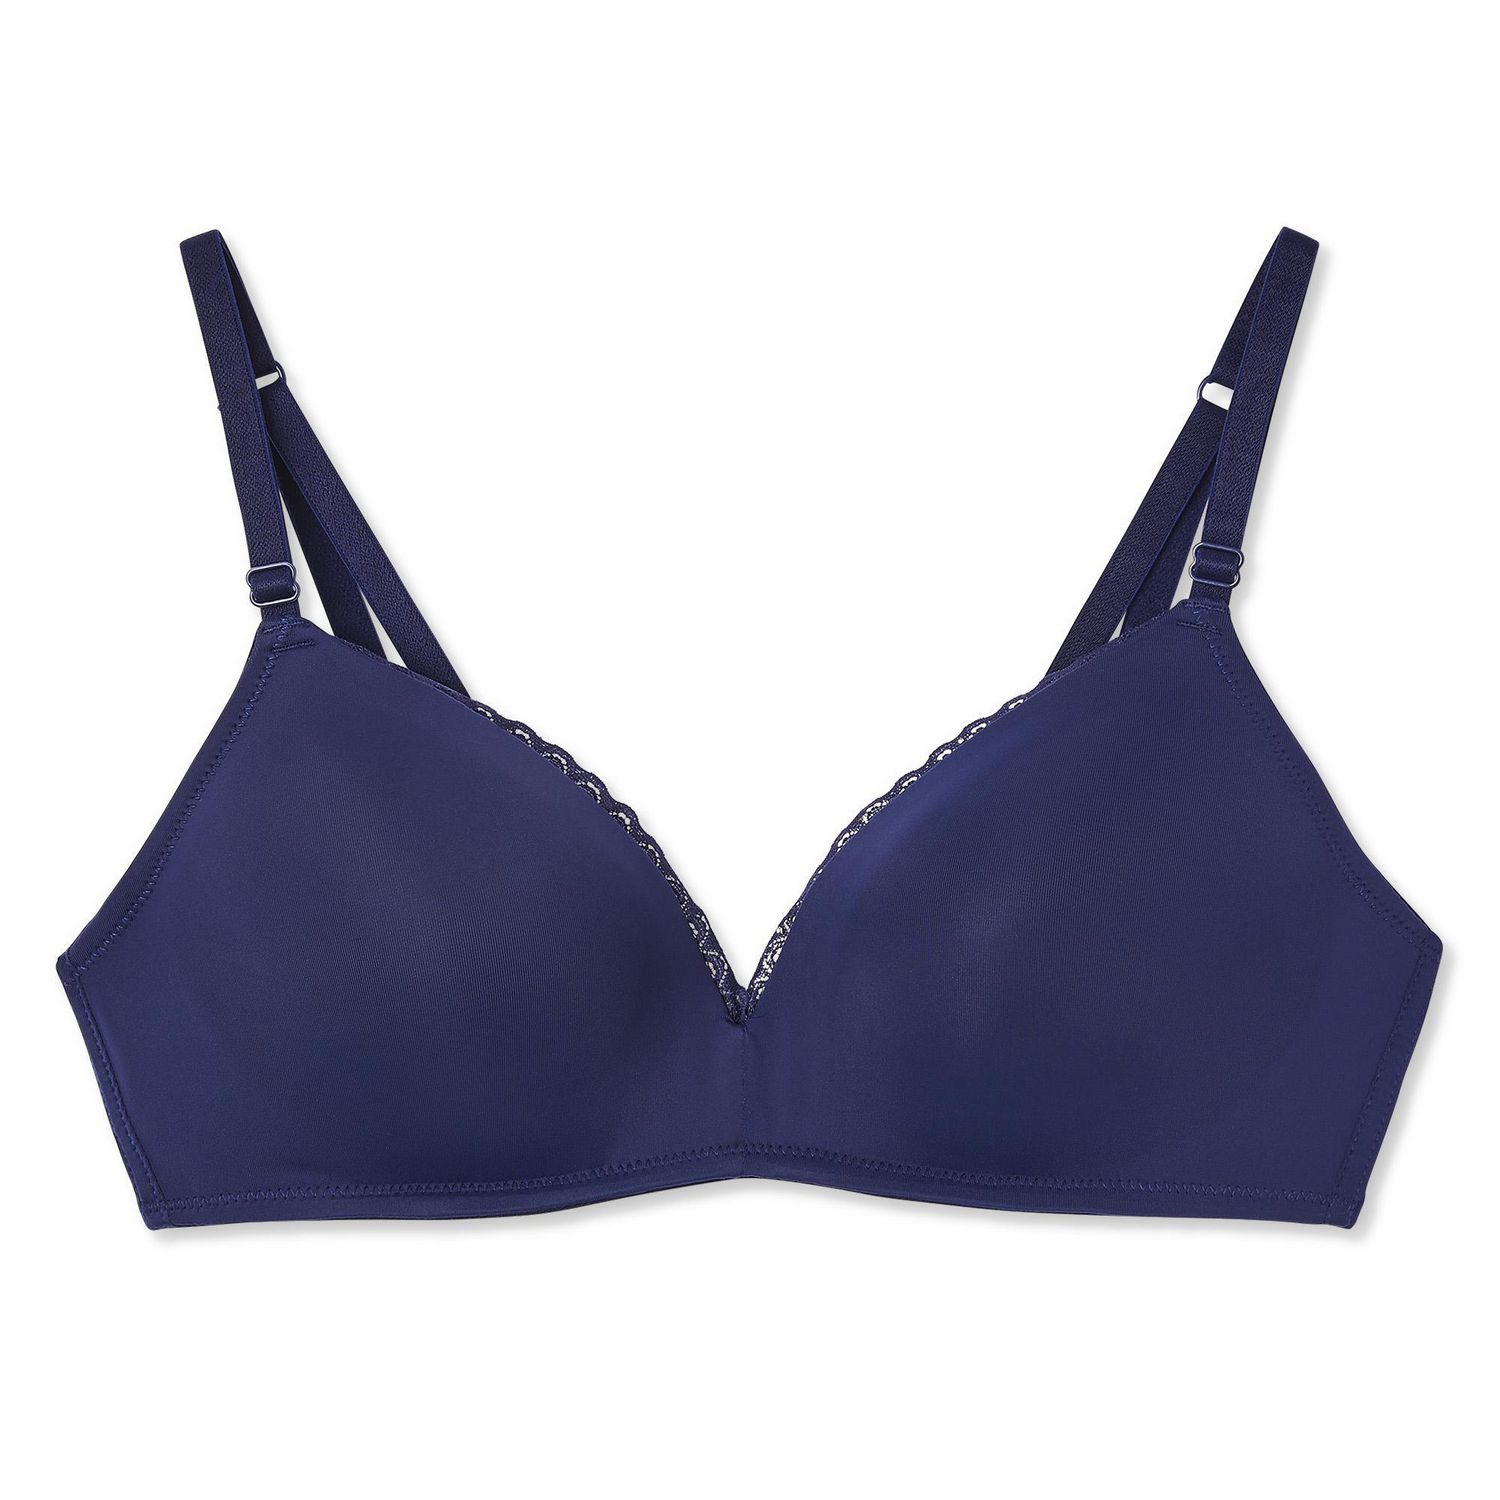 George Women's Seamless Bra with Molded Cups | Walmart Canada